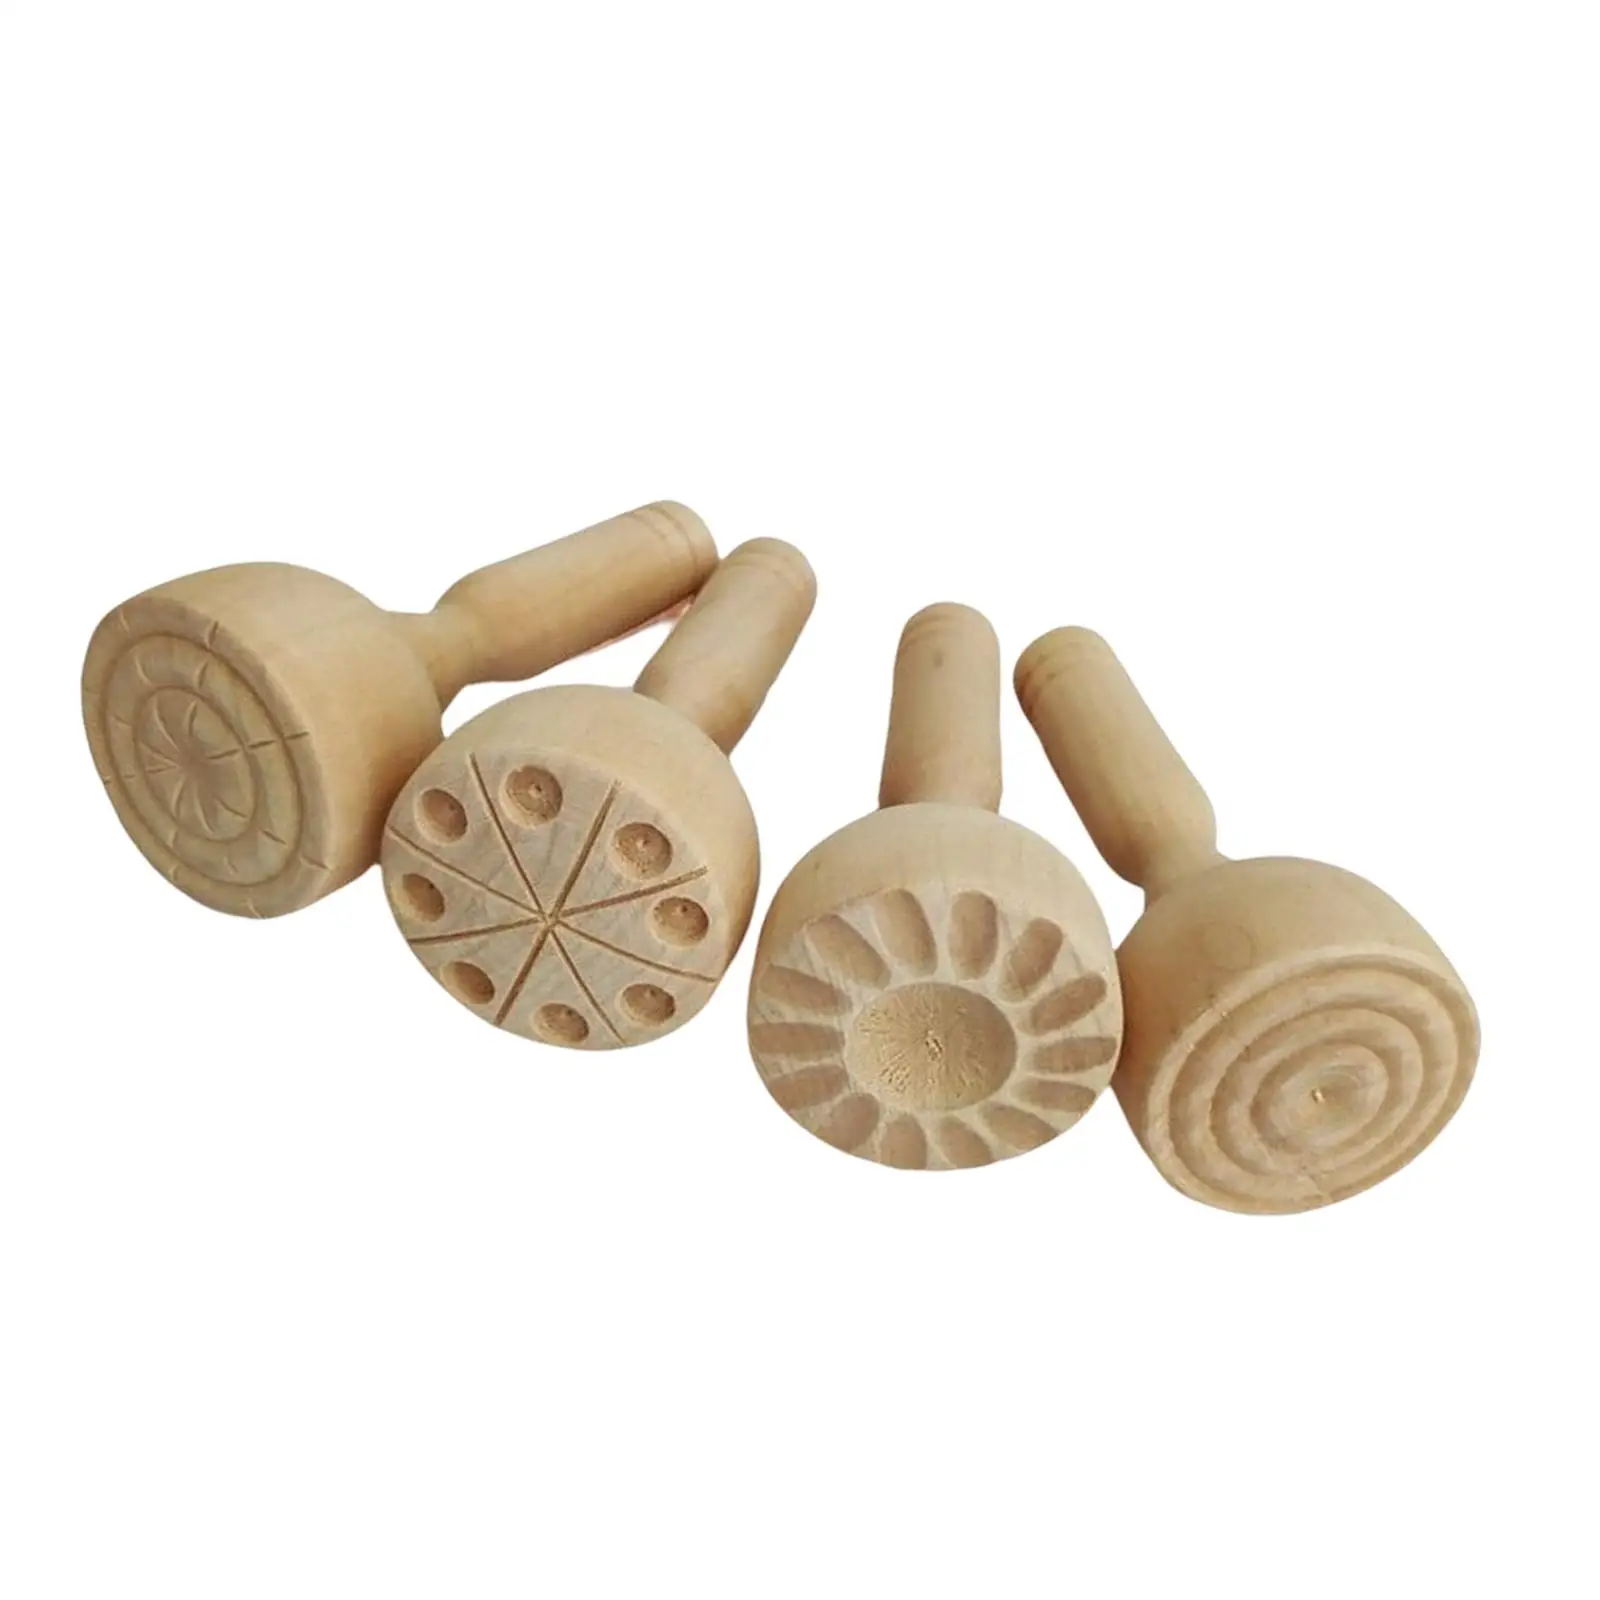 4 Pieces Traditional Wooden seal Molds Tools Making Molds mould Supplies for Art Craft Activity Supplies Child